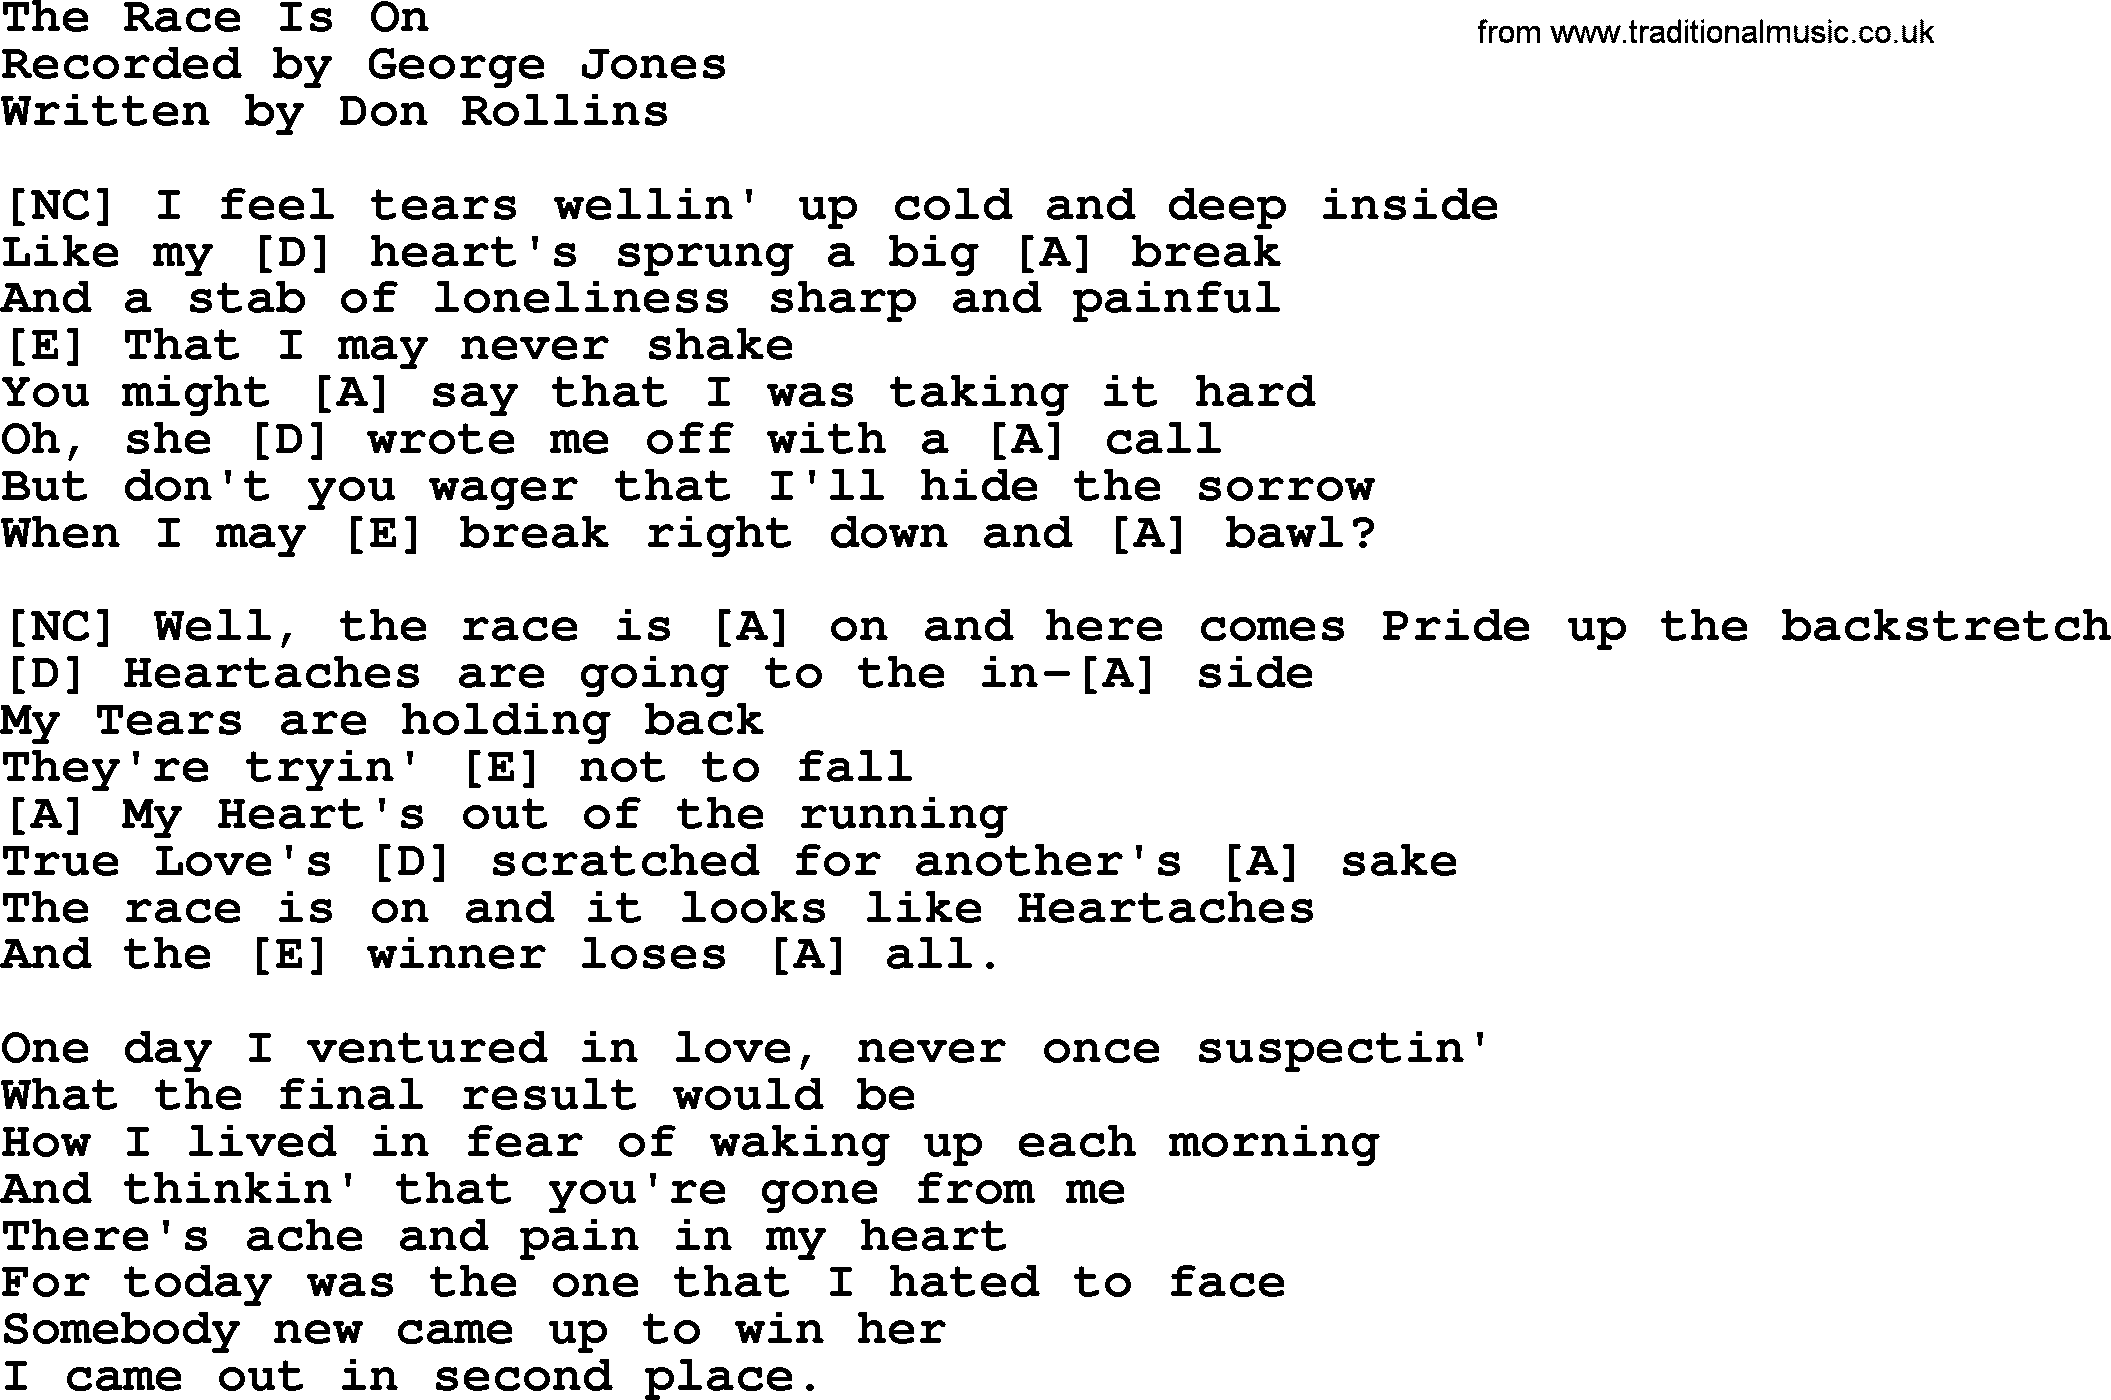 George Jones song: The Race Is On, lyrics and chords